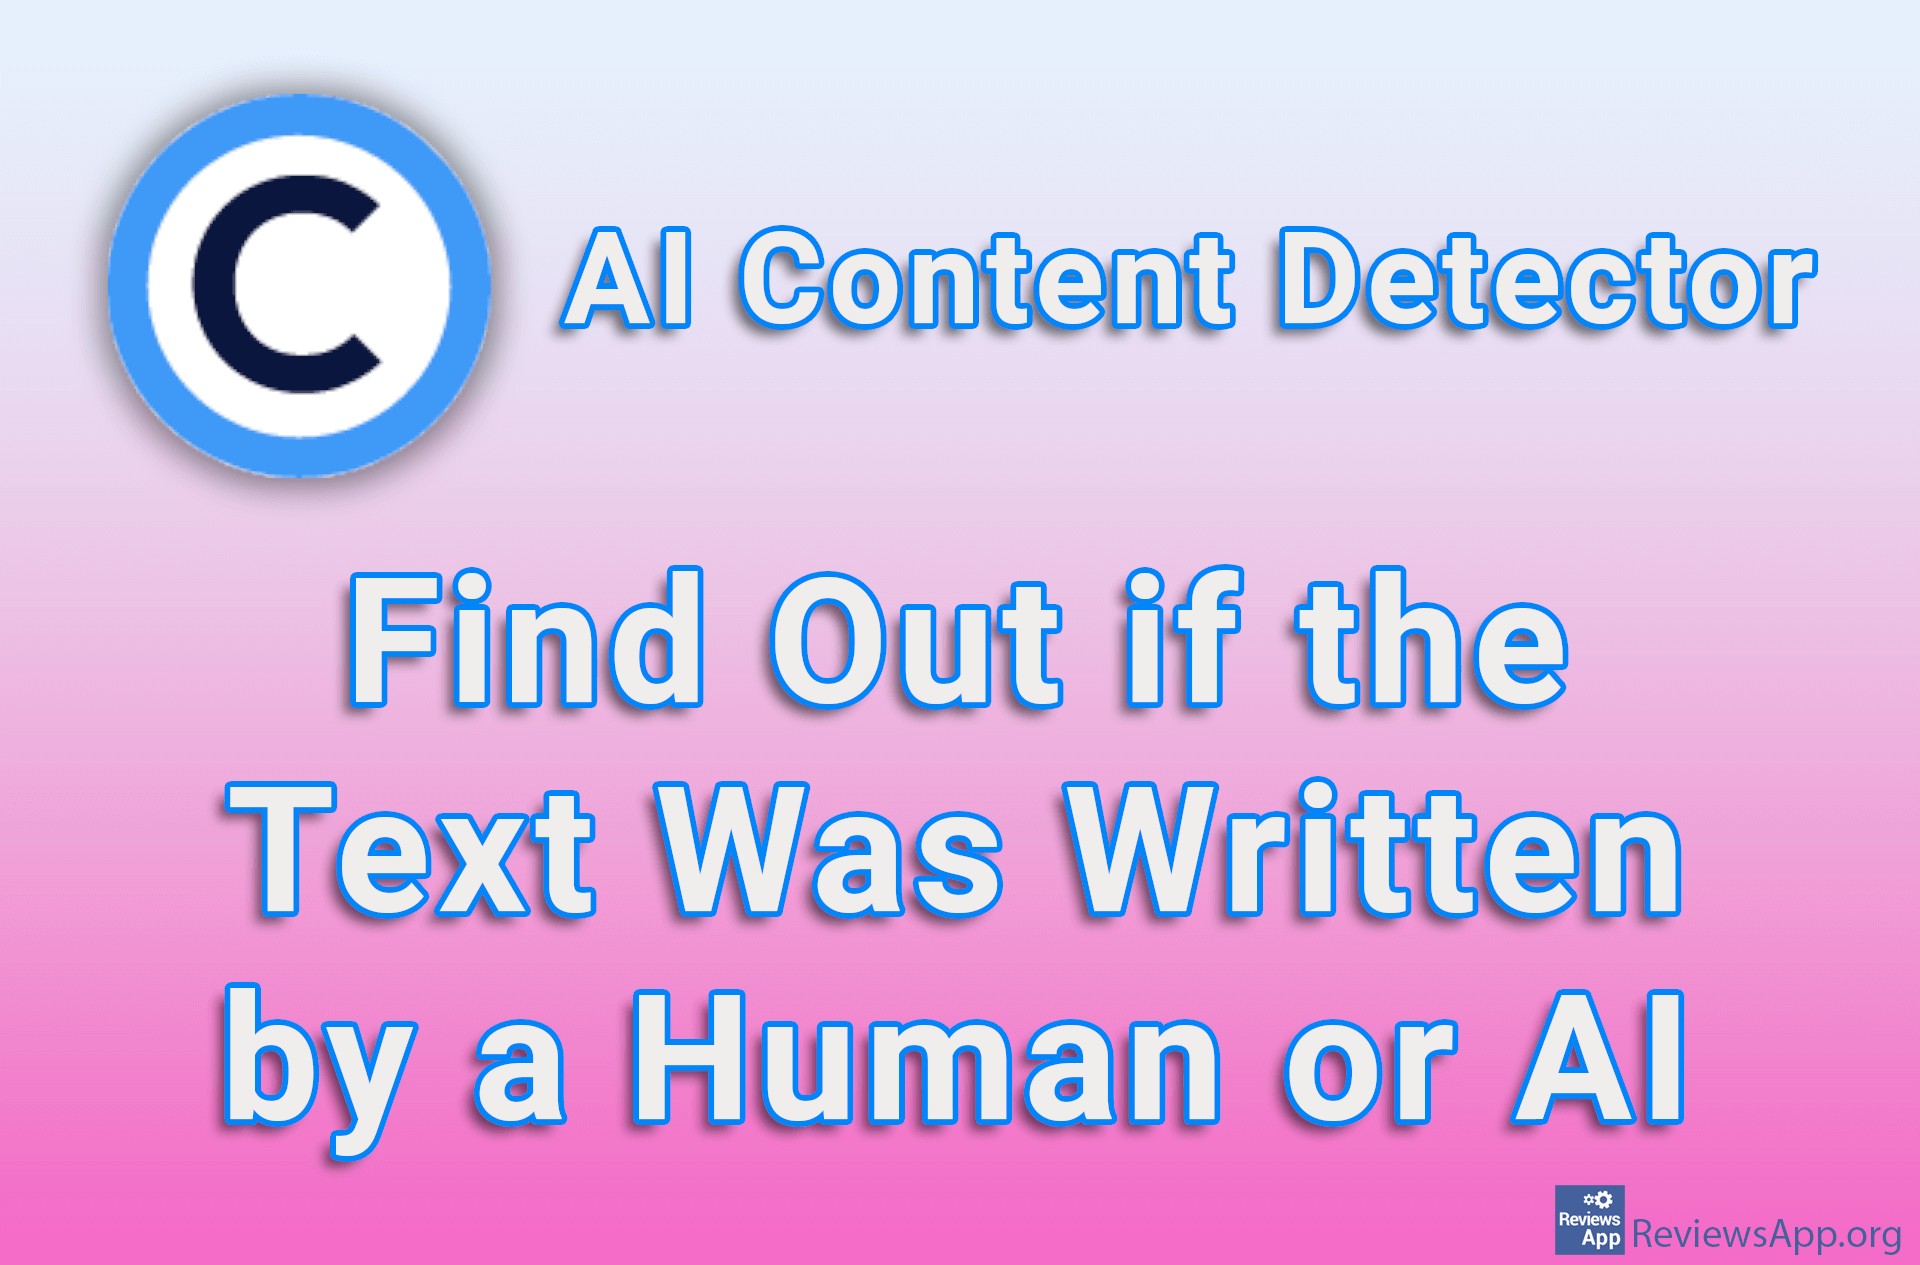 AI Content Detector – Find Out if the Text Was Written by a Human or AI